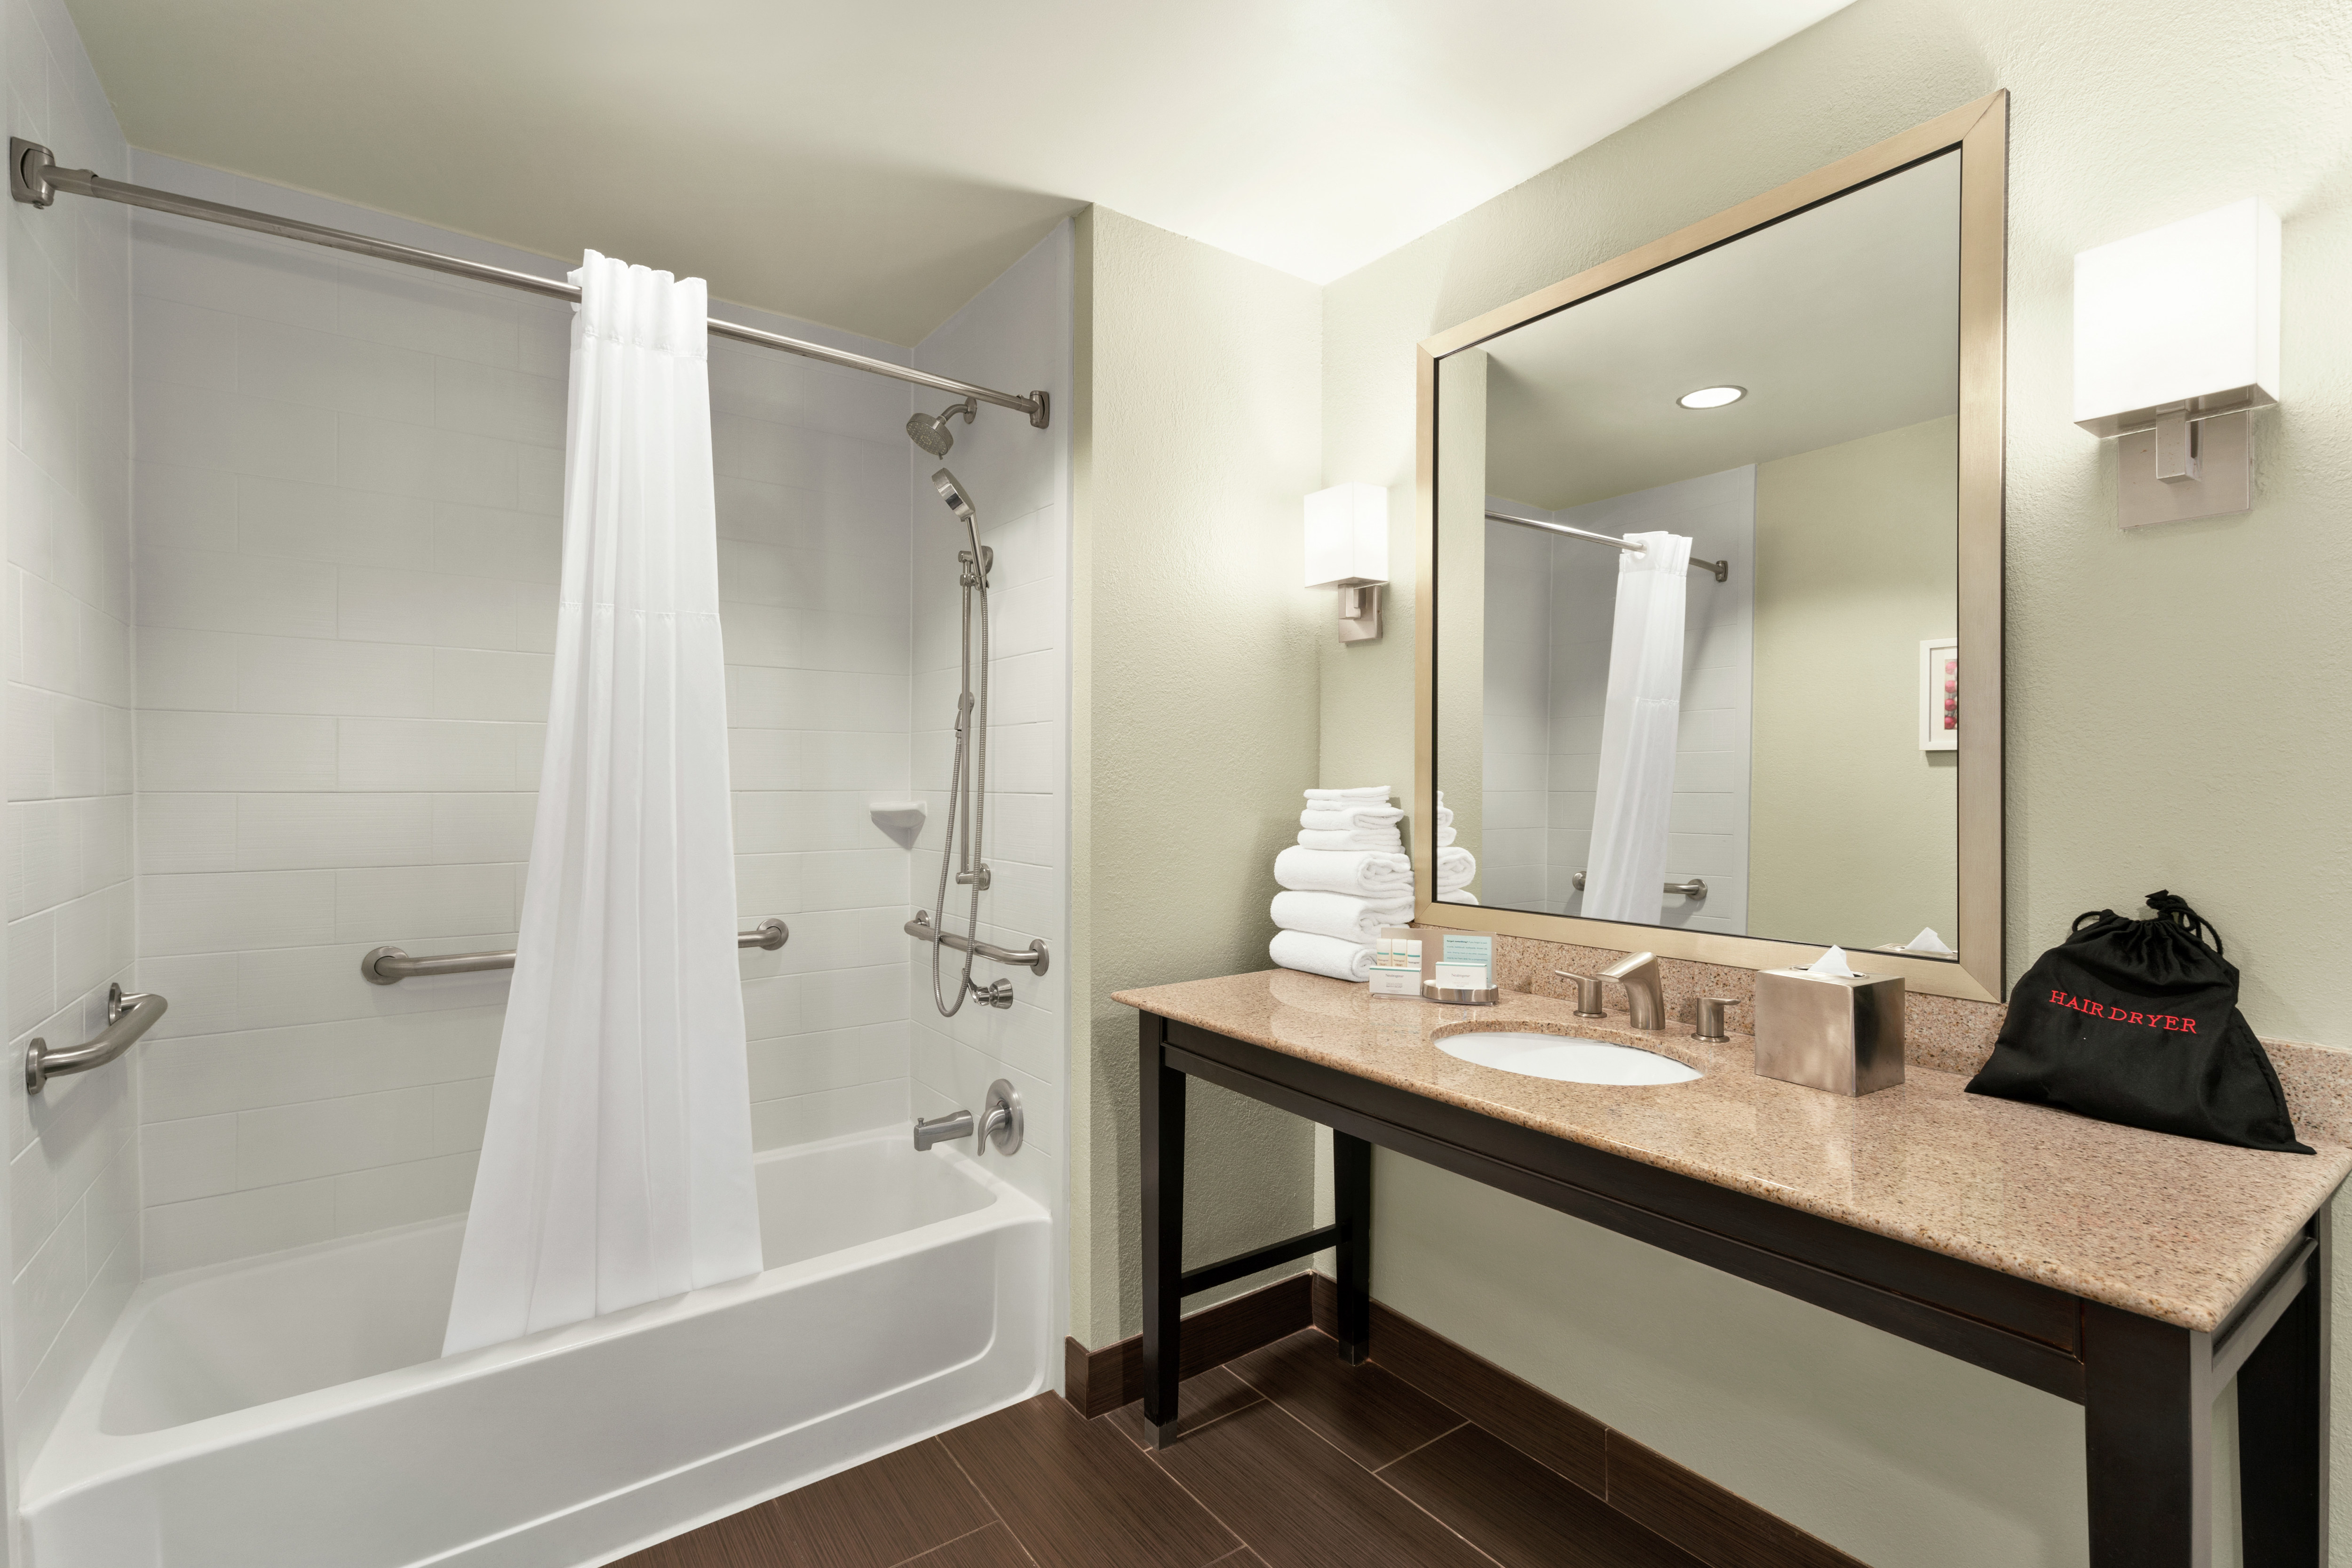 Spacious accessible bathroom featuring tub with grab bars, vanity, and mirror.